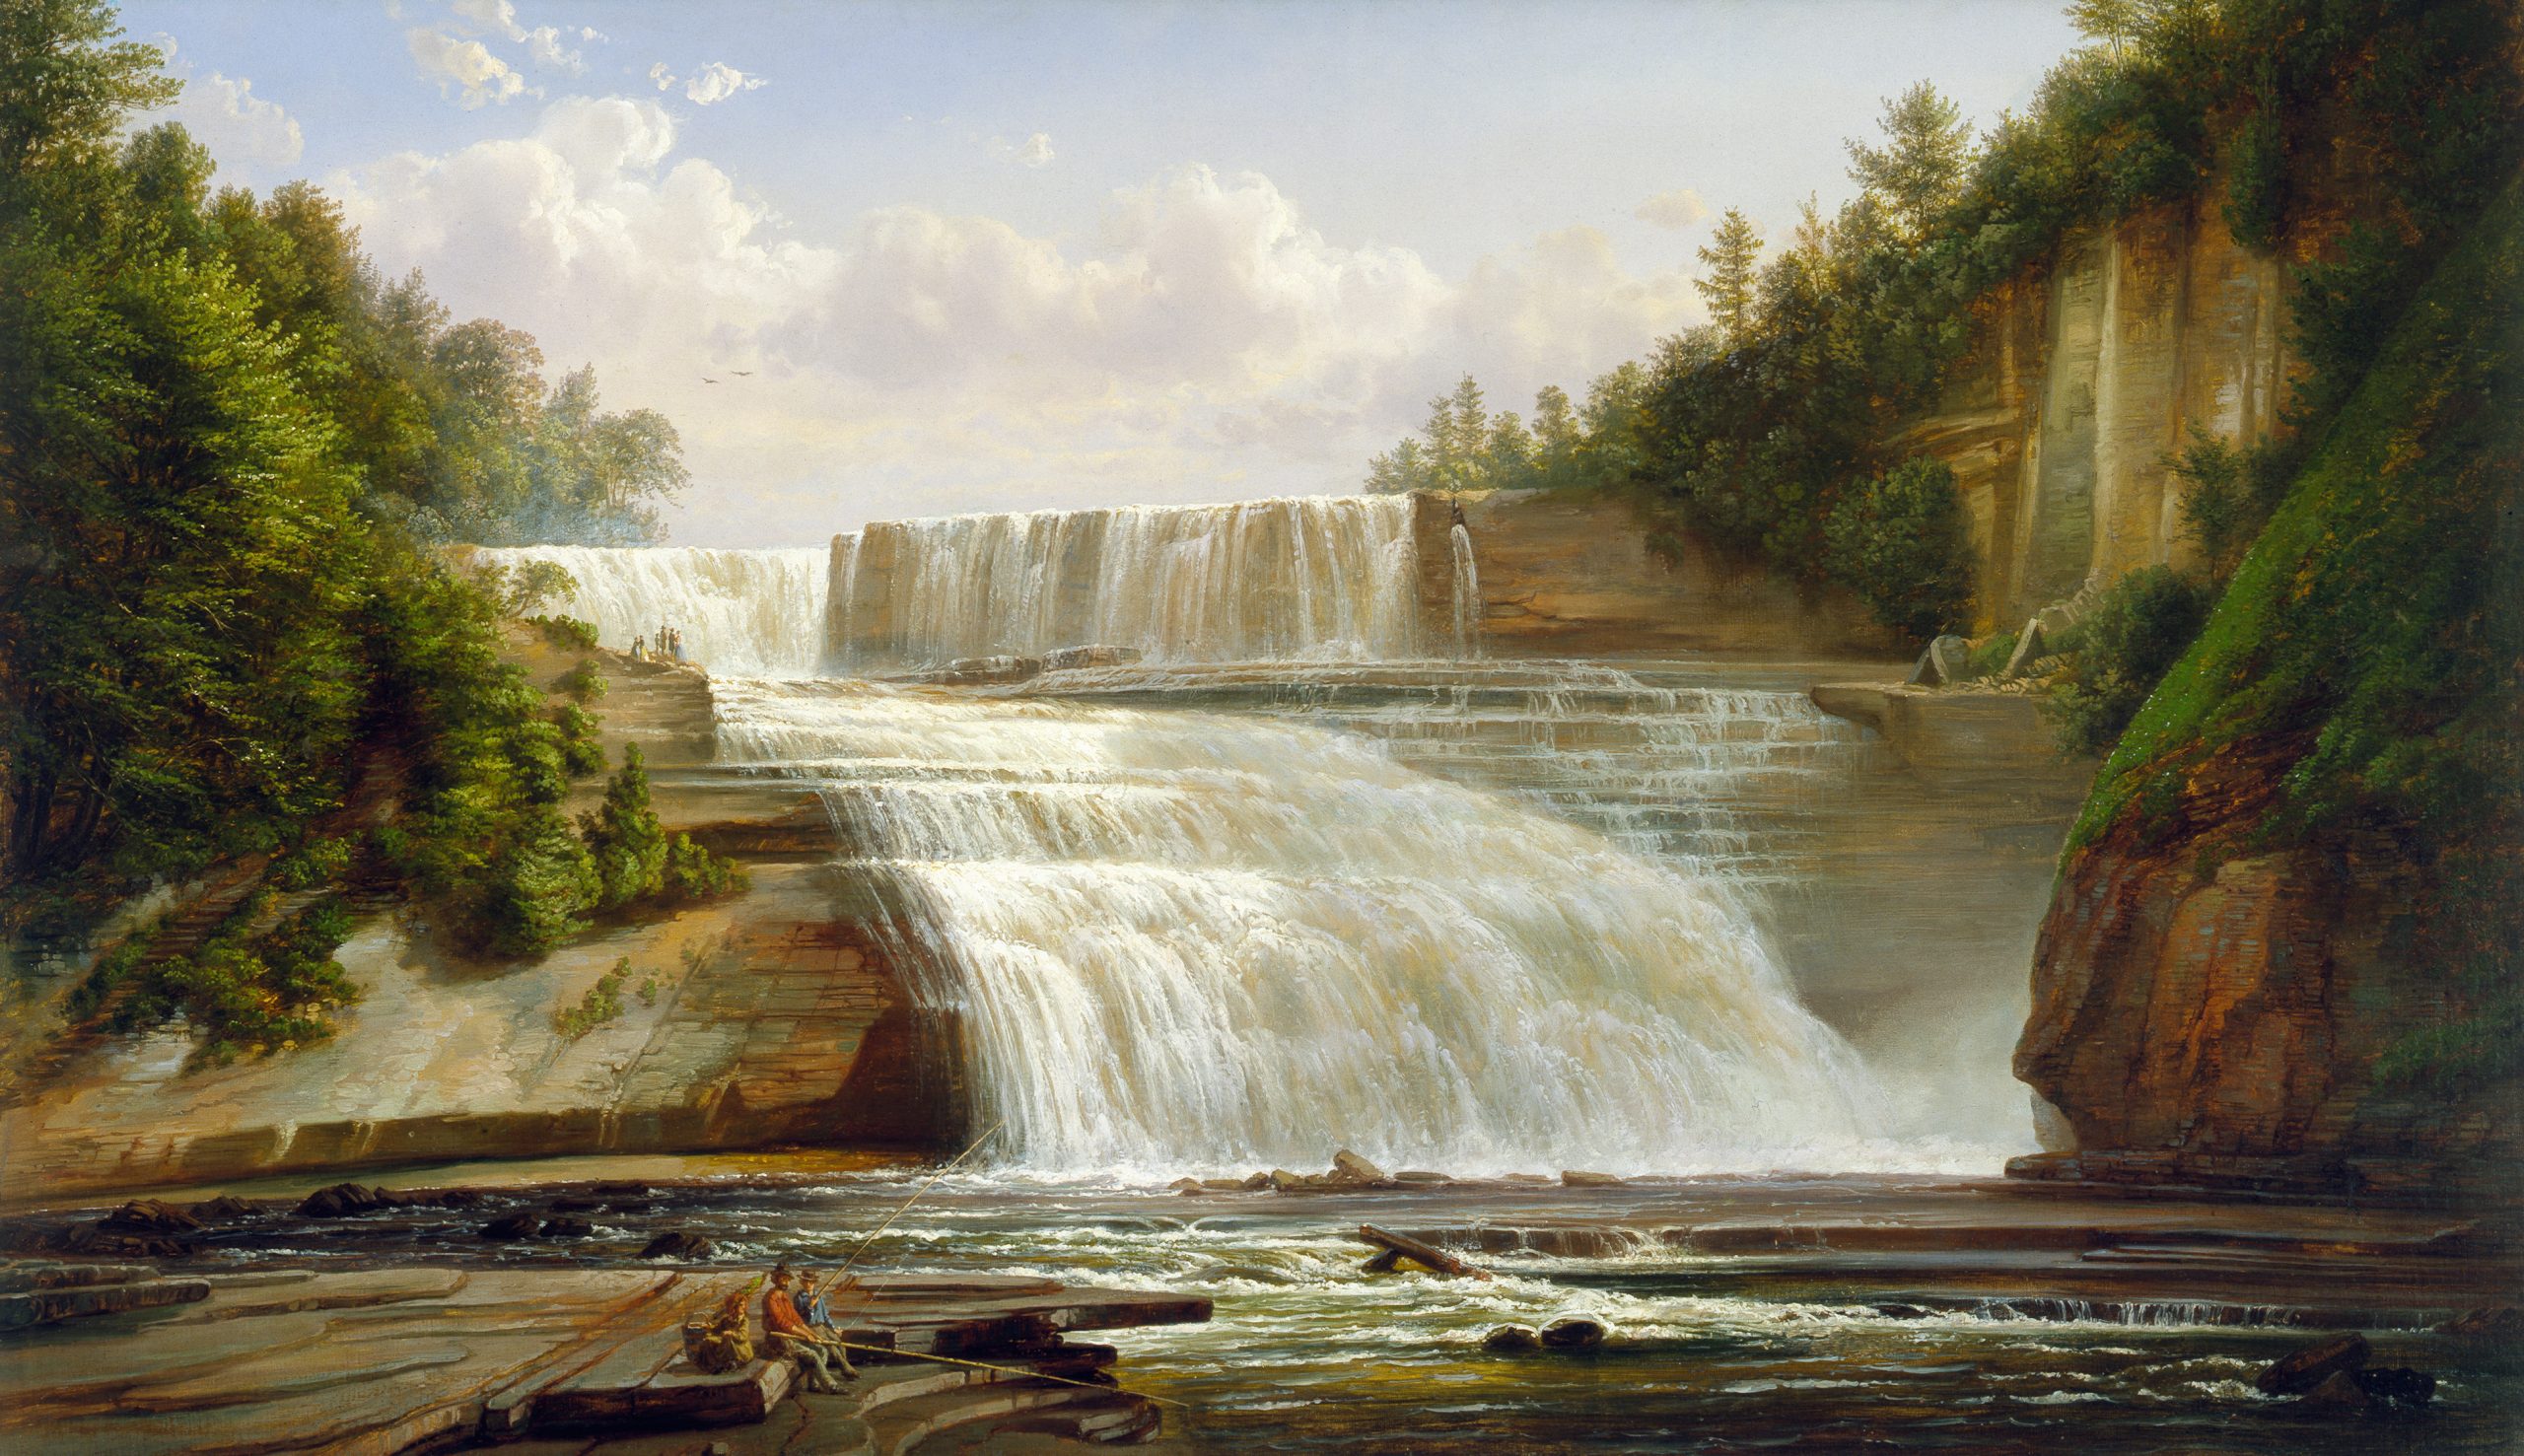 Regional Landscape Exhibitions on View Now at Munson